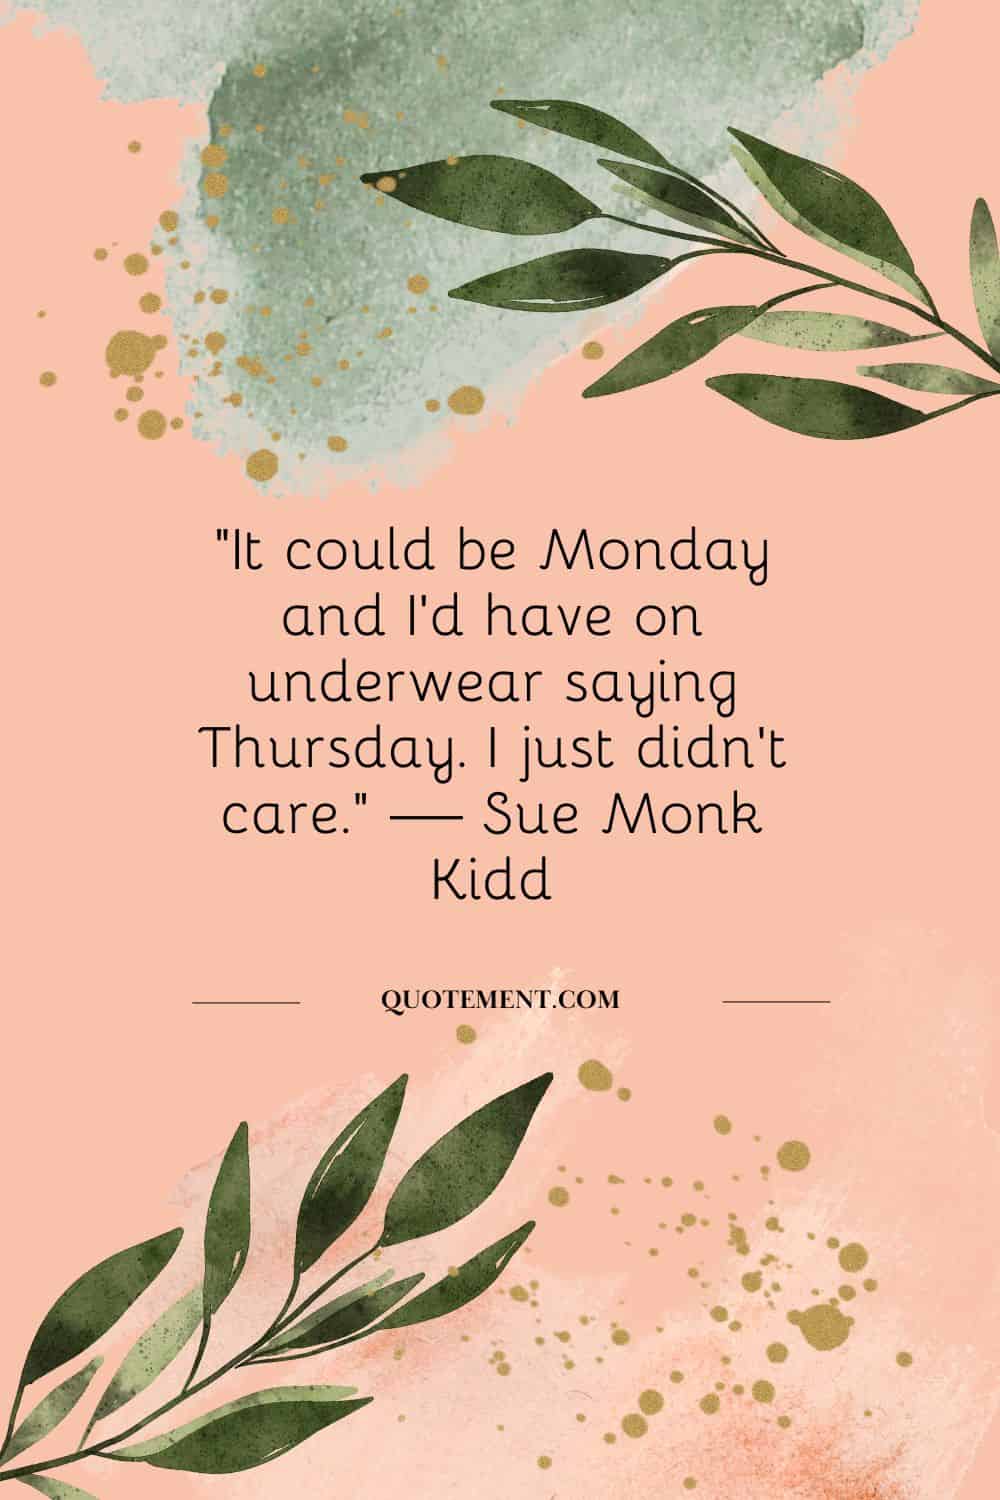 “It could be Monday and I’d have on underwear saying Thursday. I just didn’t care.” — Sue Monk Kidd